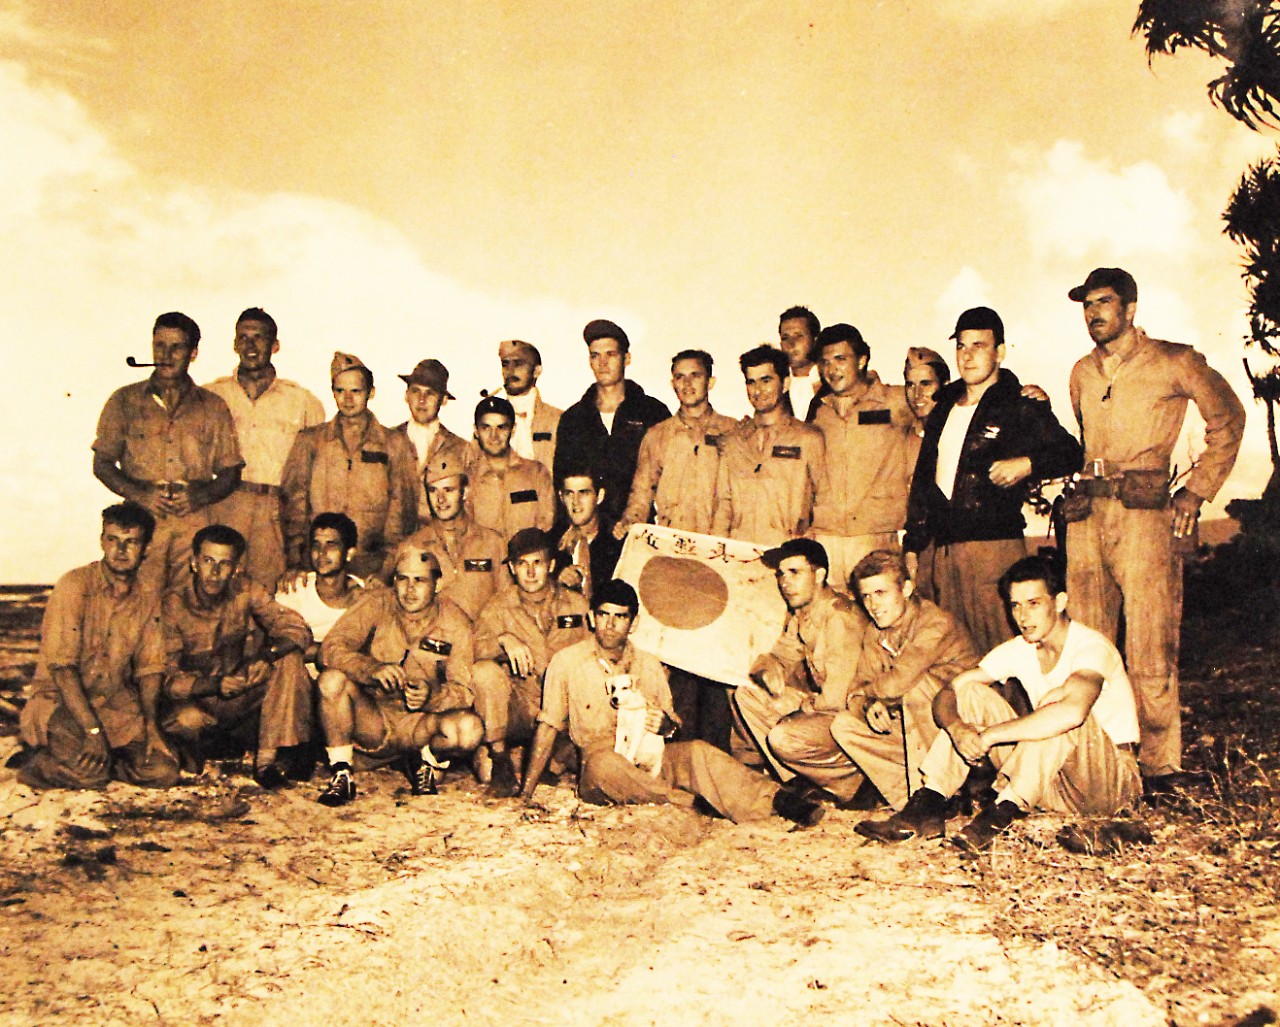 80-G-40892:    “The Cactus Airforce.”   Marine Aviation Squadrons involved in Guadalcanal Battles.  Front row, kneeling and sitting, left to right:  First Lieutenant S.K. Ottesen; First Lieutenant A. Christoperson; First Lieutenant C.E. McCullach; Second Lieutenant Augustus L. Arndt; First Lieutenant Jack Cosley; Second Lieutenant H. S. White; First Lieutenant A.L. Jones; First Lieutenant D.L. Cummings; Stinko, the mascot; Captain H.G. Schlendering; First Lieutenant H.E. Cook; and First Lieutenant R.O. Brown.   Back row, standing:   Second Lieutenant James A. Sullivan; First Lieutenant W.P. Mitchell; First Lieutenant E. P. Thompson; Second Lieutenant T. N. Withrow; First Lieutenant J.A. Etheridge; First Lieutenant Allen Ringblon; Captain Leon M. Williamson; First Lieutenant G.E. Lumpkin Lieutenant J.R. Blain; Second Lieutenant John E. Hays; Second Lieutenant W.J.F. Hacker; First Lieutenant R.D. Bachtel; First Lieutenant George Koutelas; and Second Lieutenant Howard Frazer,  March 16, 1943.   U.S. Navy  Official U.S. Navy Photograph, now in the collections of the National Archives.  (2016/12/20).